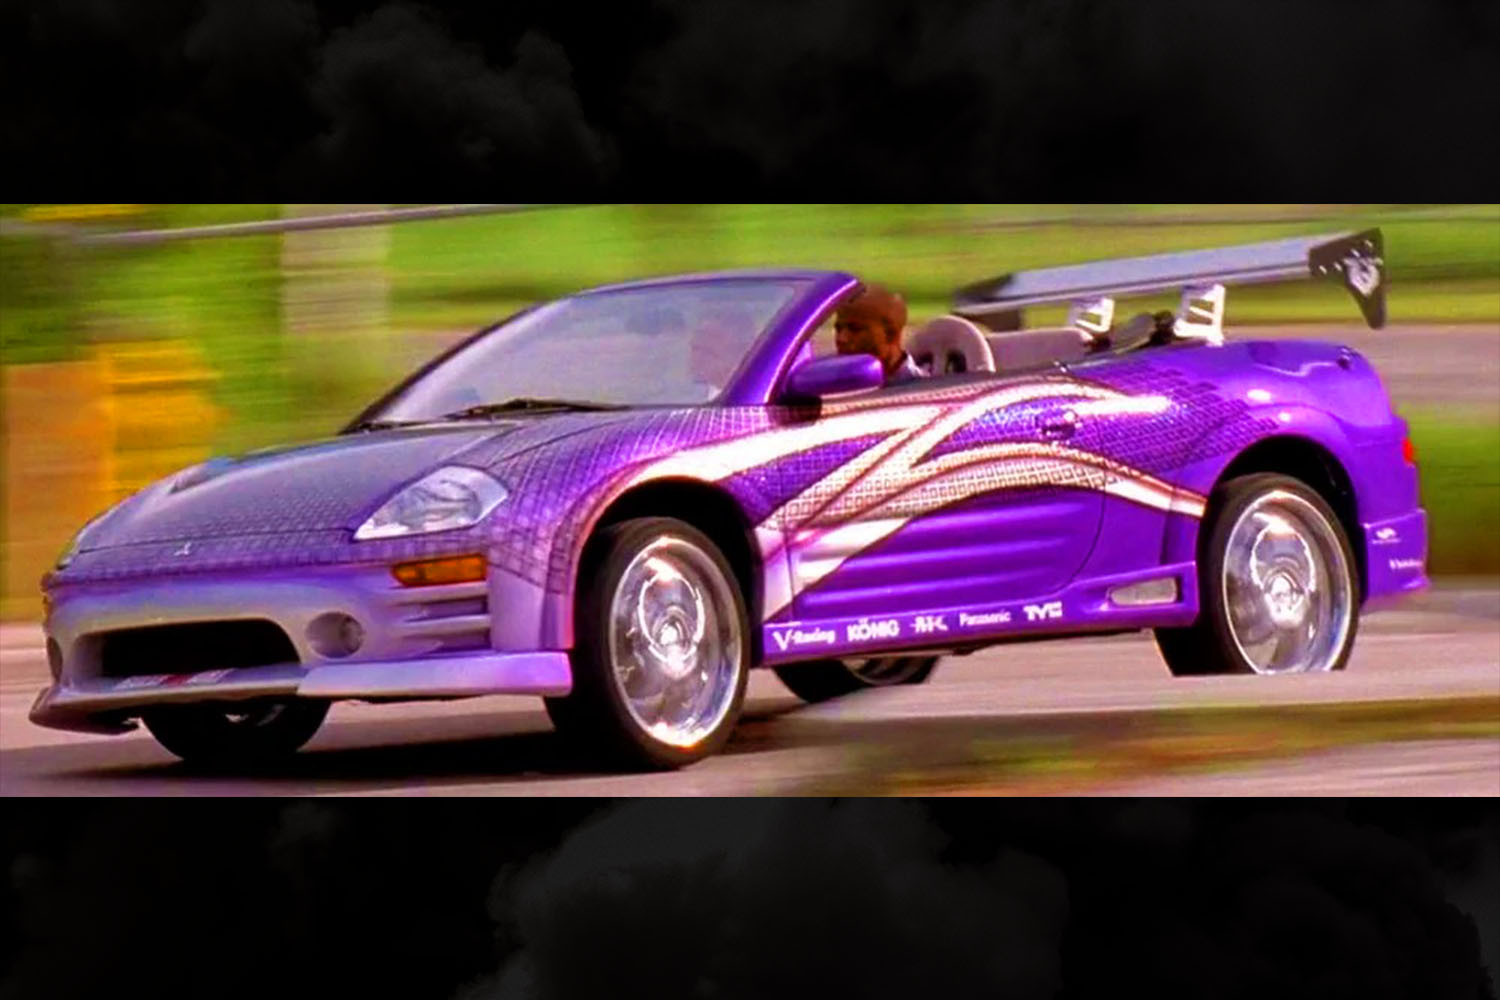 Roman Pearce (Tyrese Gibson) driving an electric purple 2003 Mitsubishi Eclipse Spyder GTS in 2 Fast 2 Furious